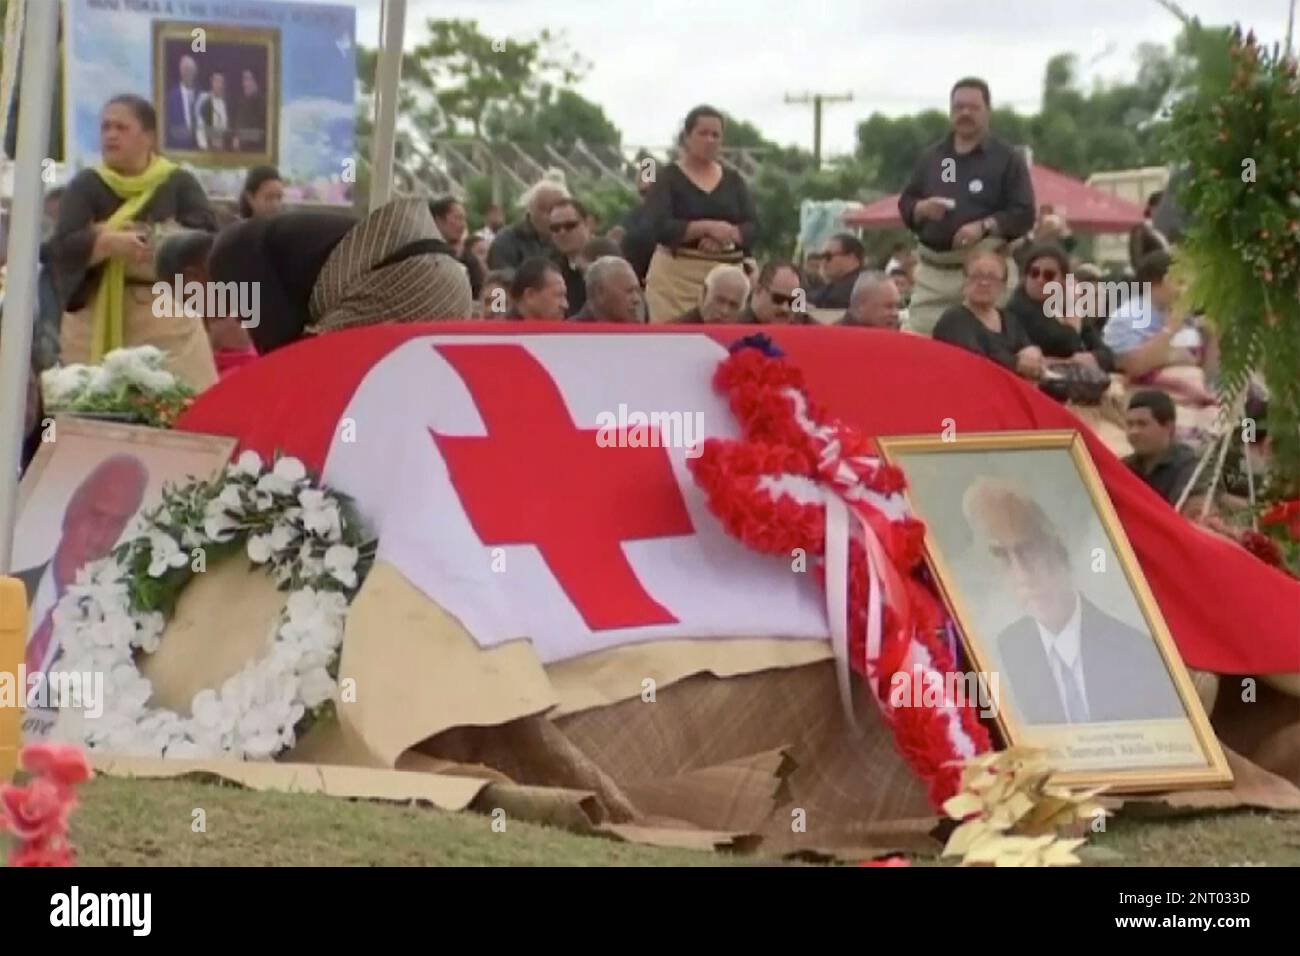 In this image from a video, a funeral service is held for the late Tongan Prime Minister Akilisi Pohiva in Nukualofa, Tonga Thursday, Sept